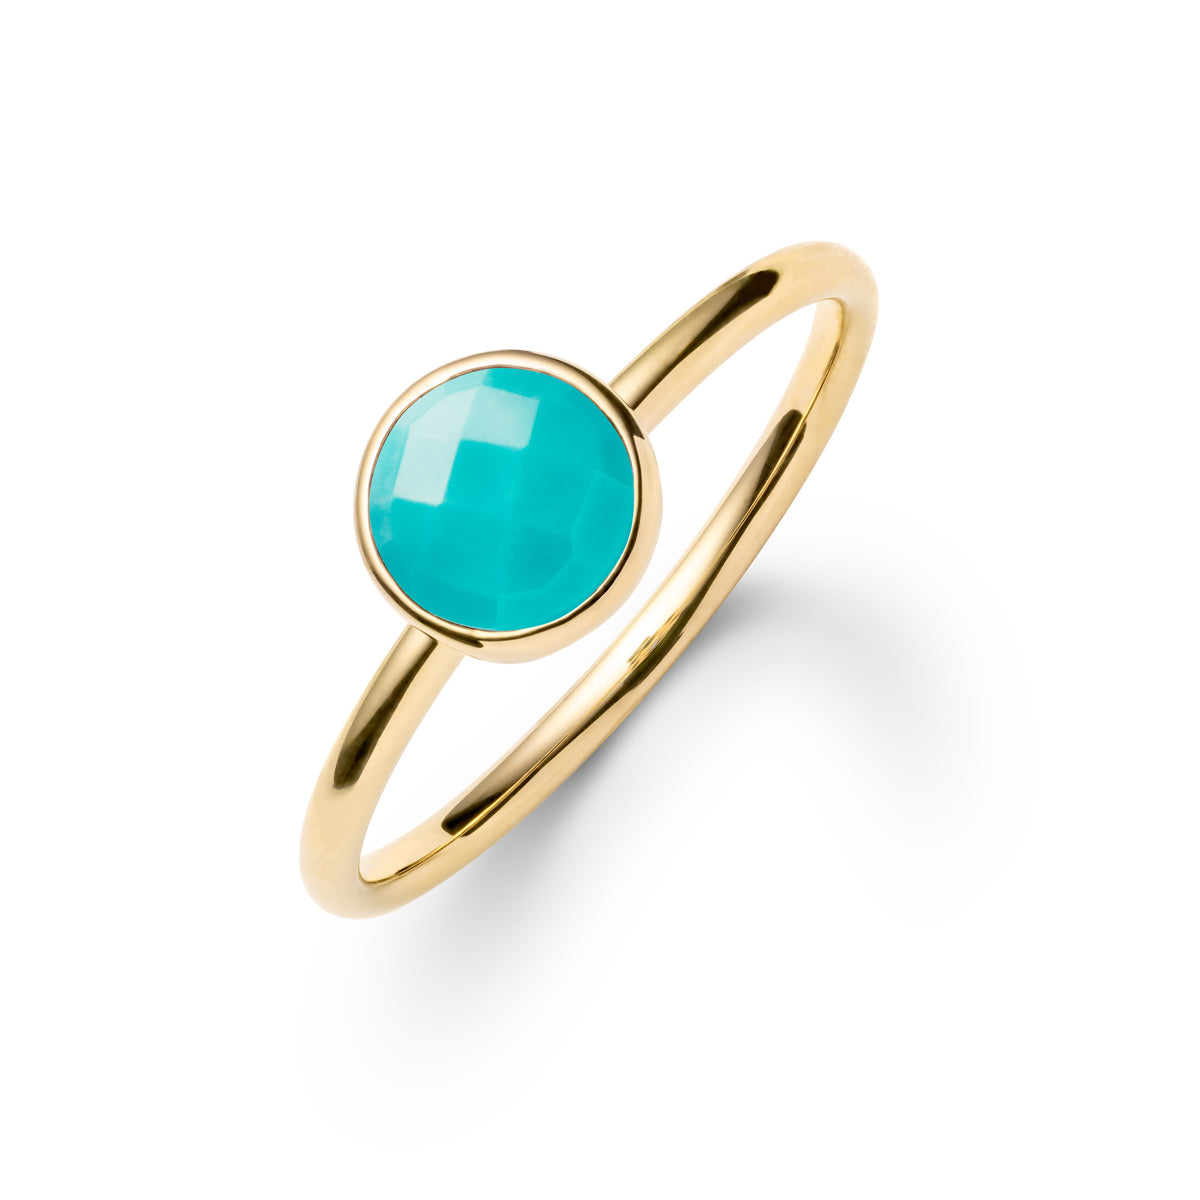 Buy 925 Sterlingsilver Ring, Turquoise Gemstone Ring, Party Wear Ring,  Handmade Jewelry, Men's Ring, Gift for Him, New Year Gift, Latest Jewelry  Online in India… | 925 sterling silver ring, Silver rings,